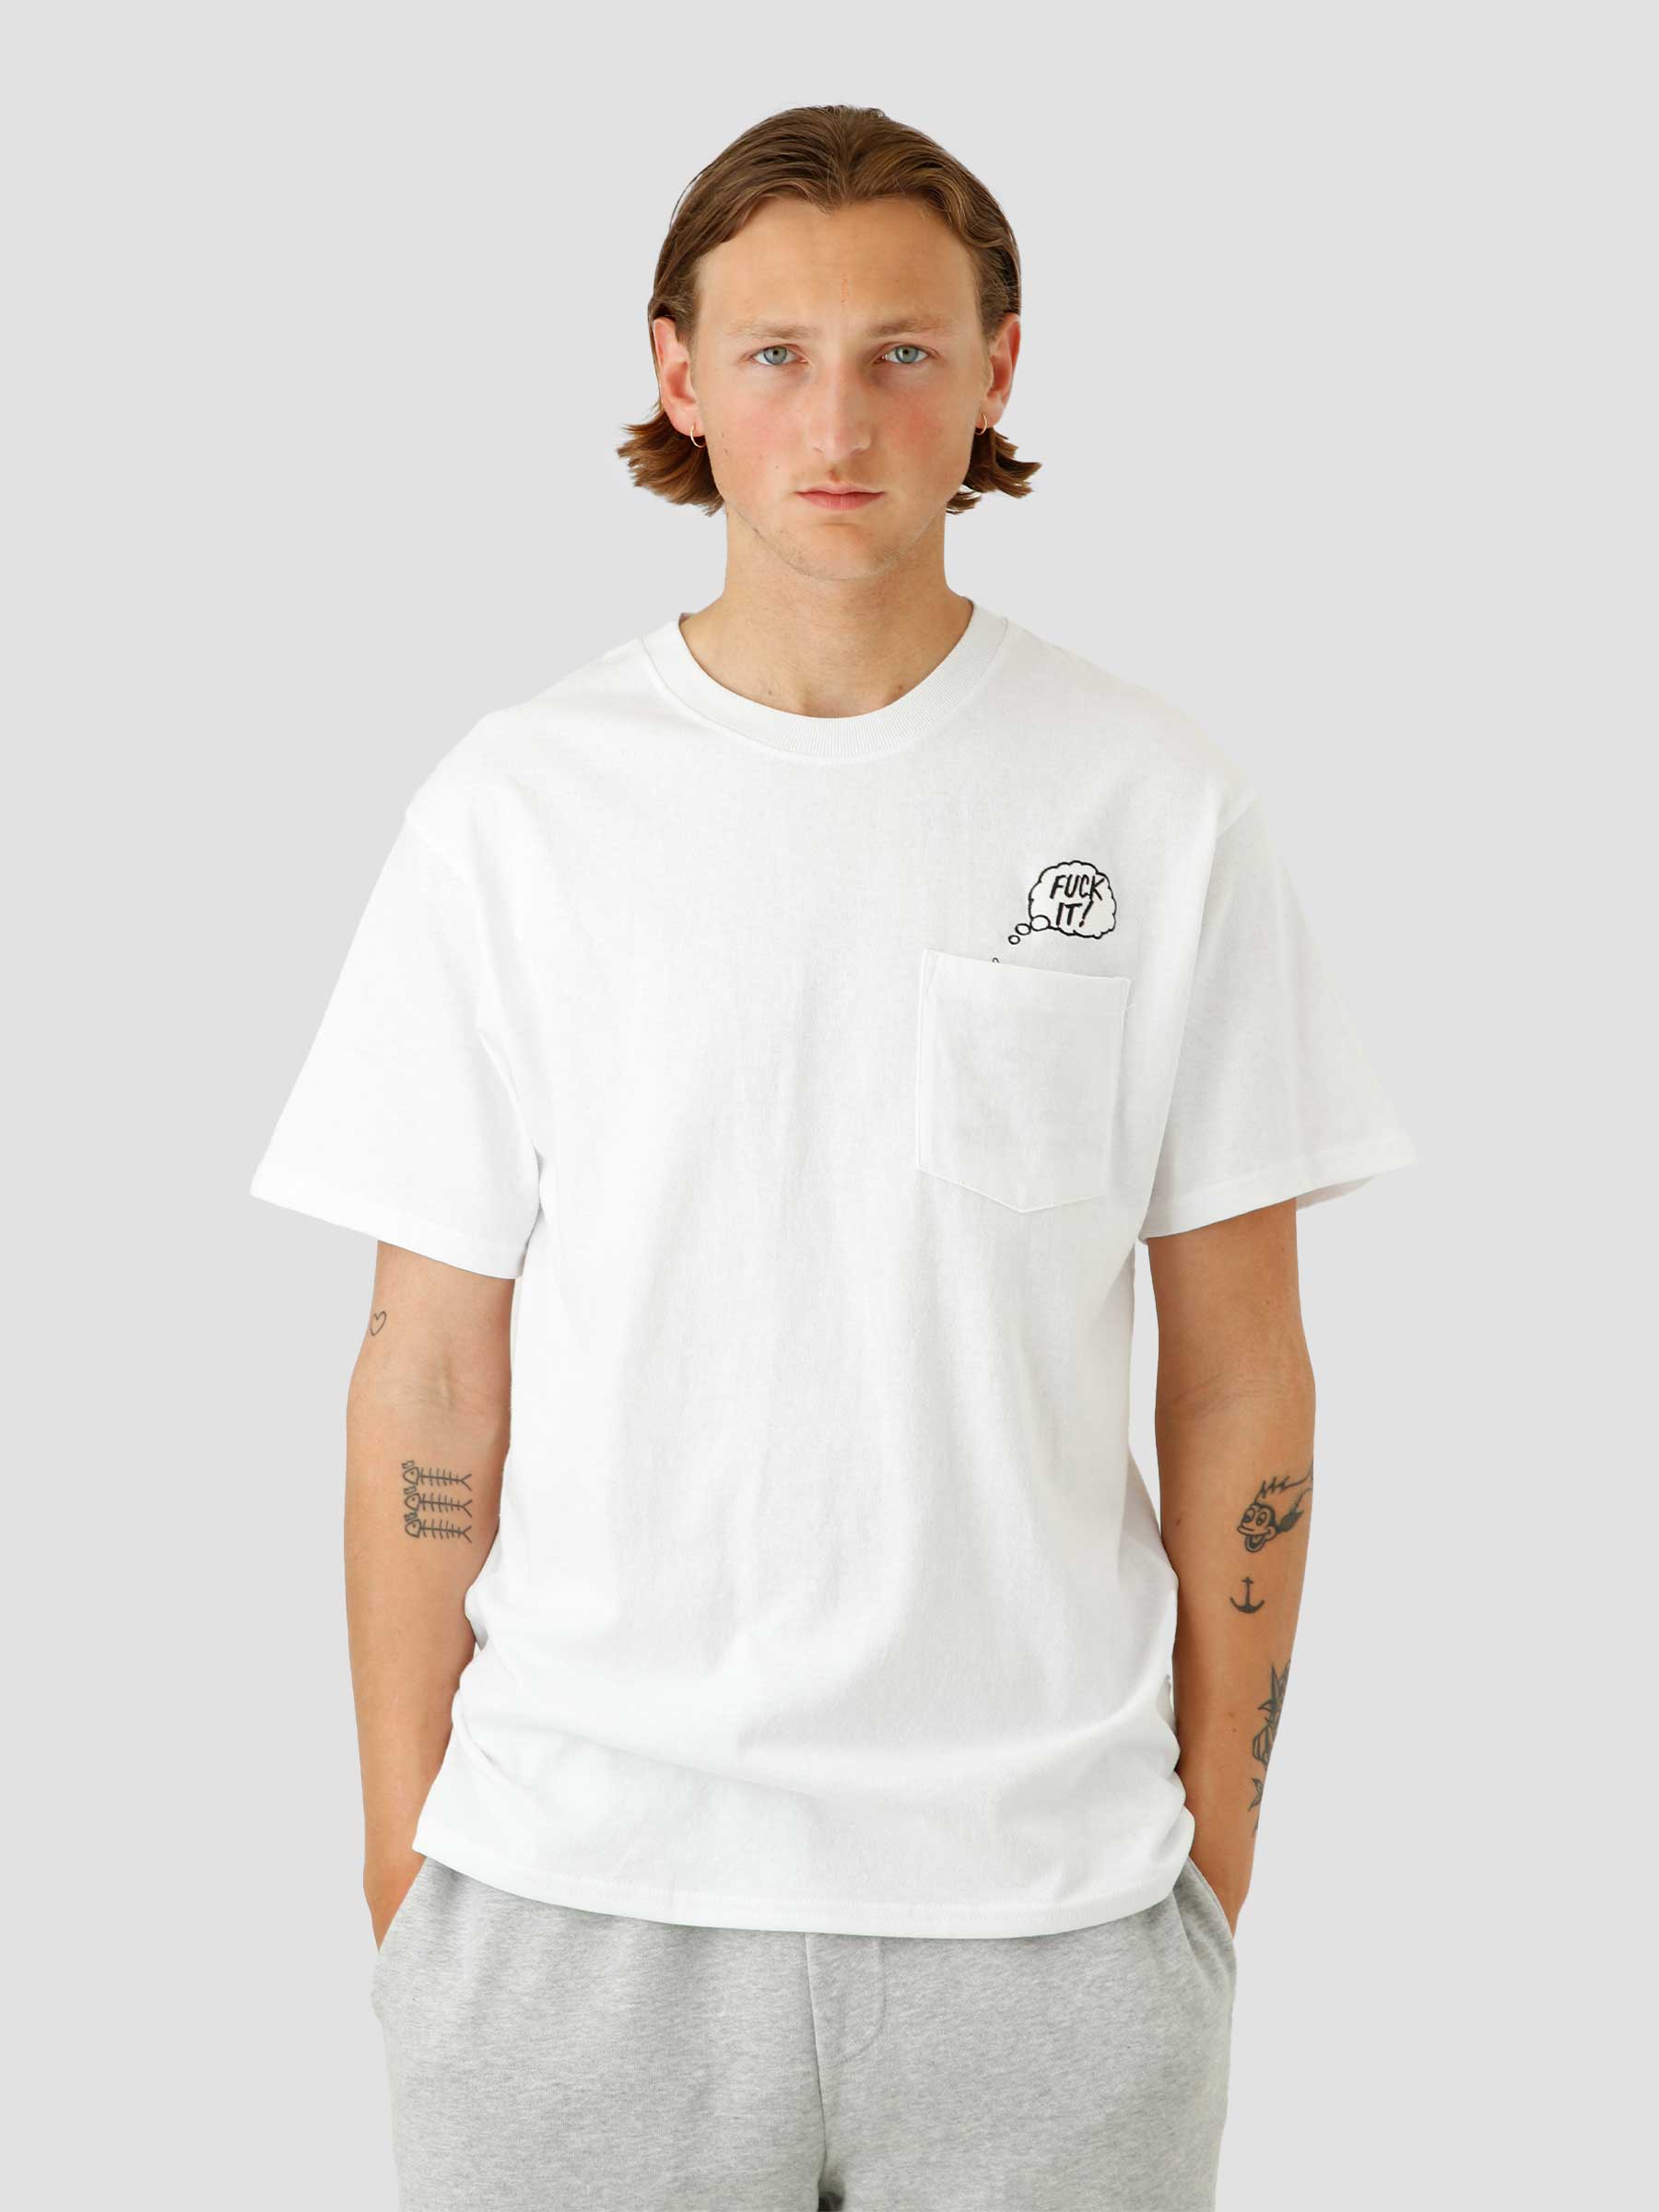 In The Pocket SS T-shirt White TS01723-WHITE